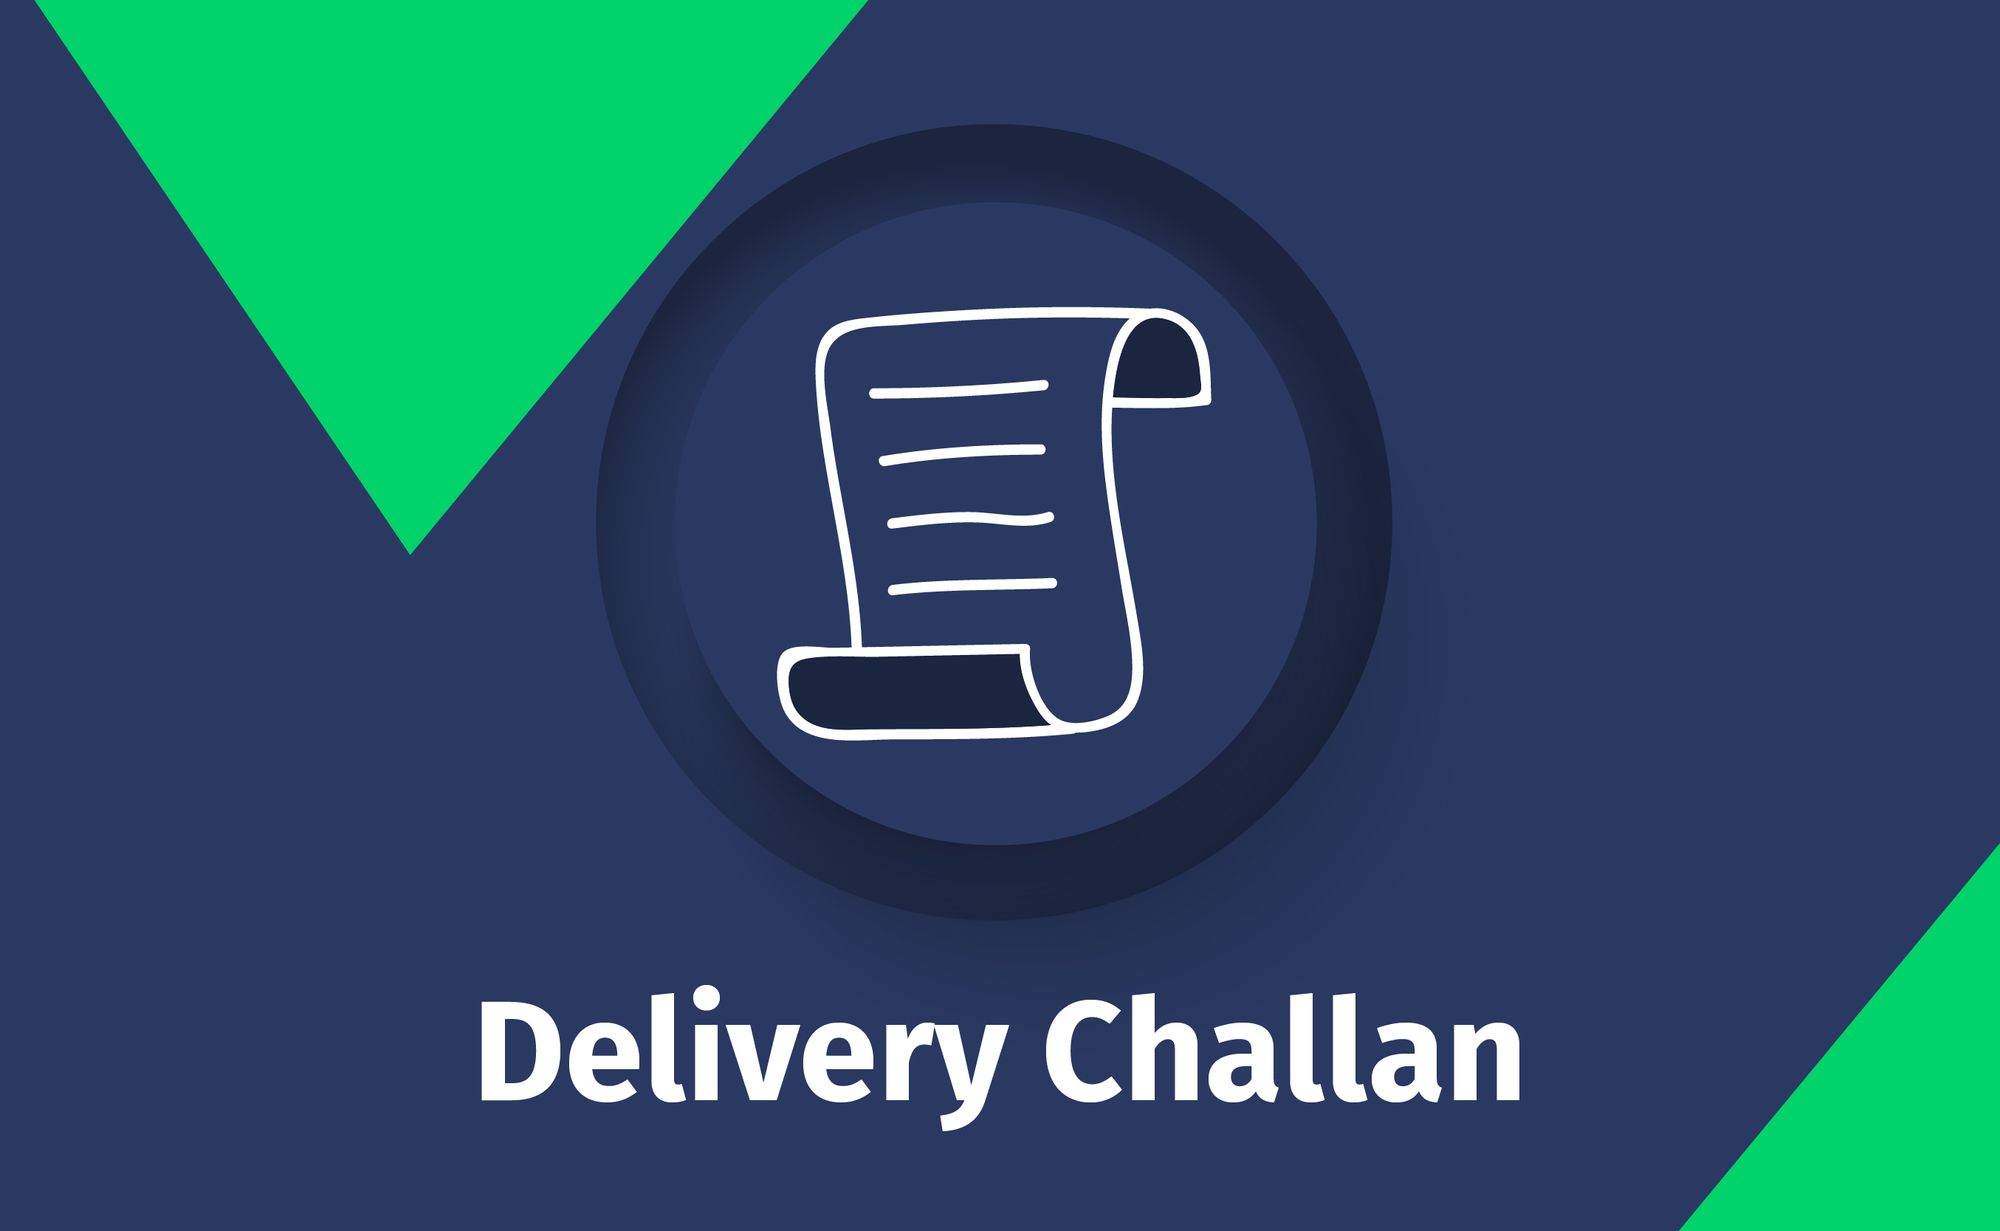 Basic Delivery Challan Format and Template